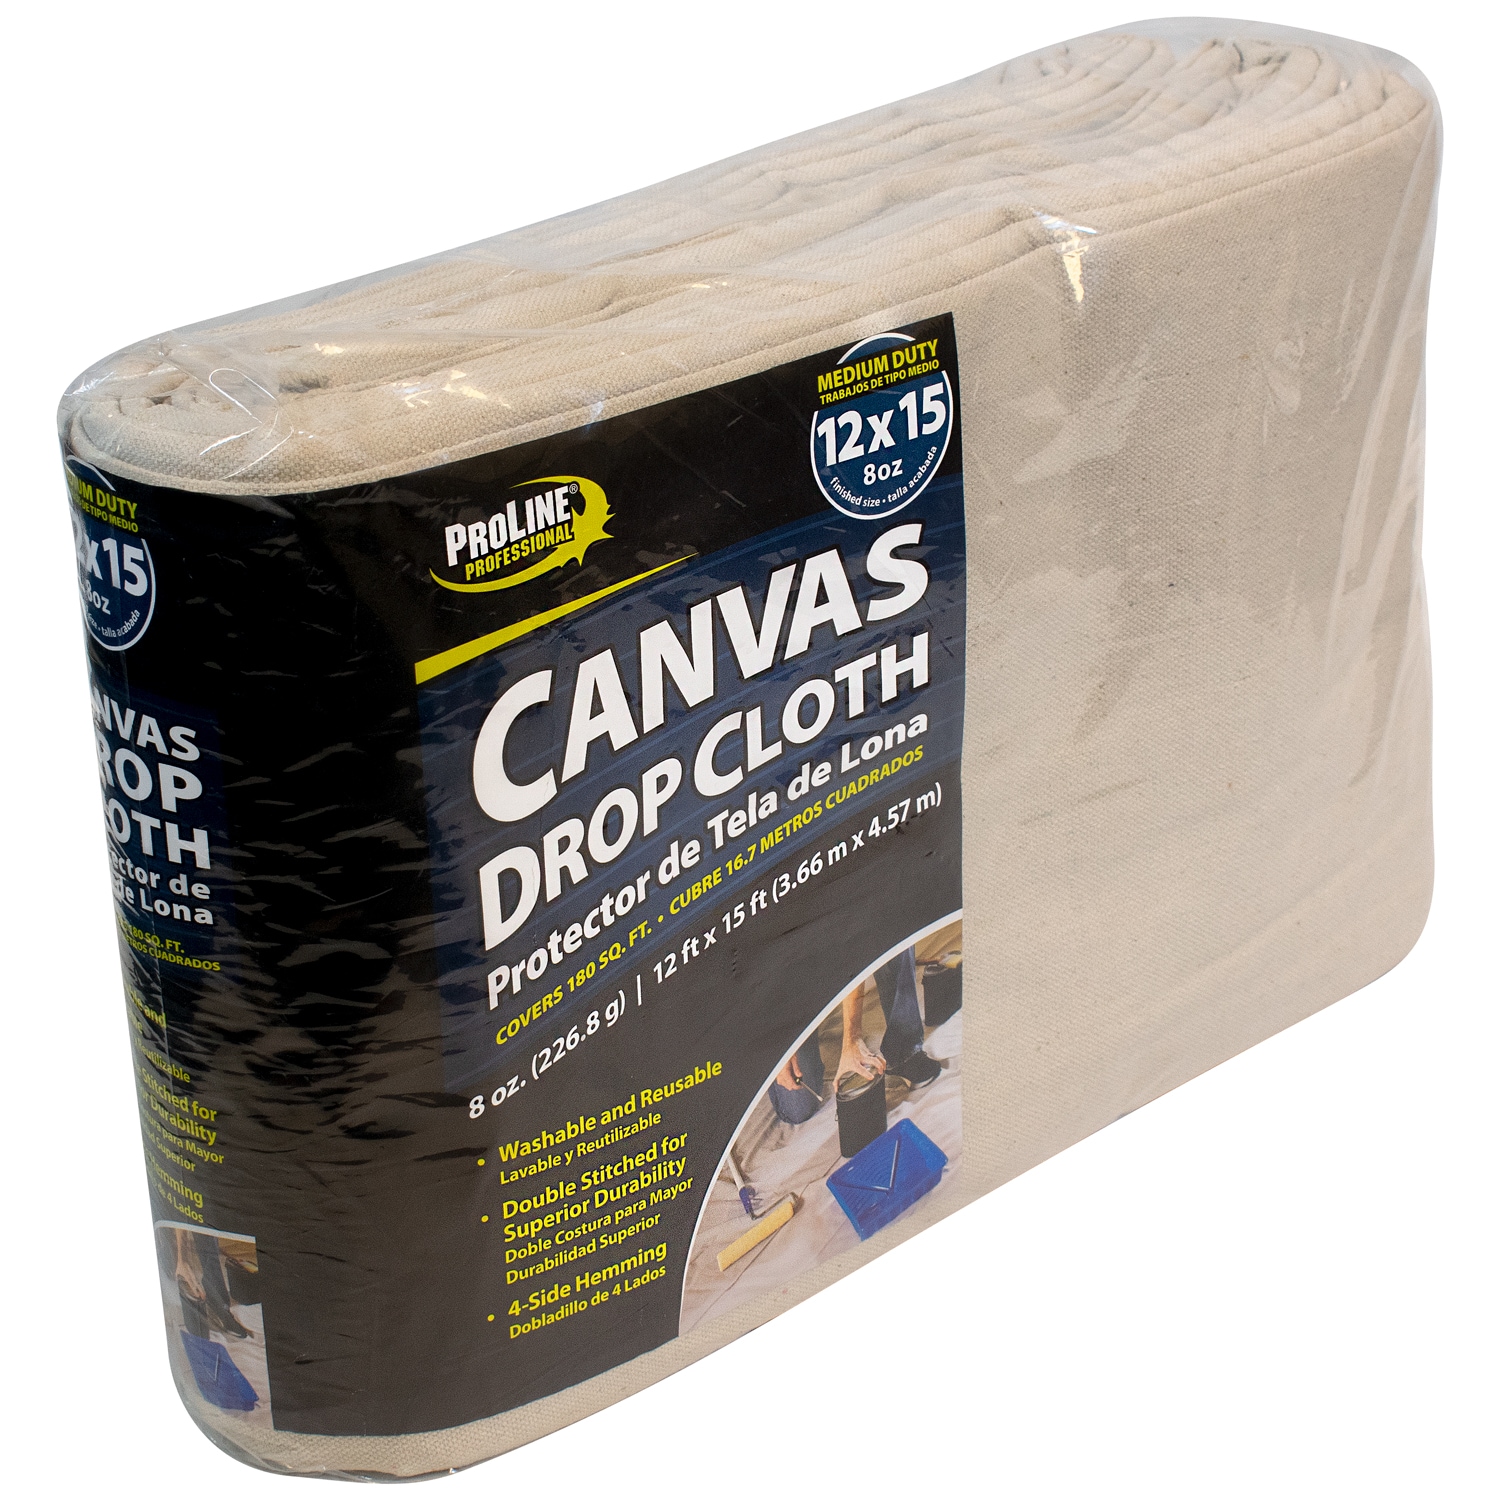 Tarp, 4 x 8 ft, 20 Mil, Polyester Coated Cotton Canvas, Heavy Duty, Black